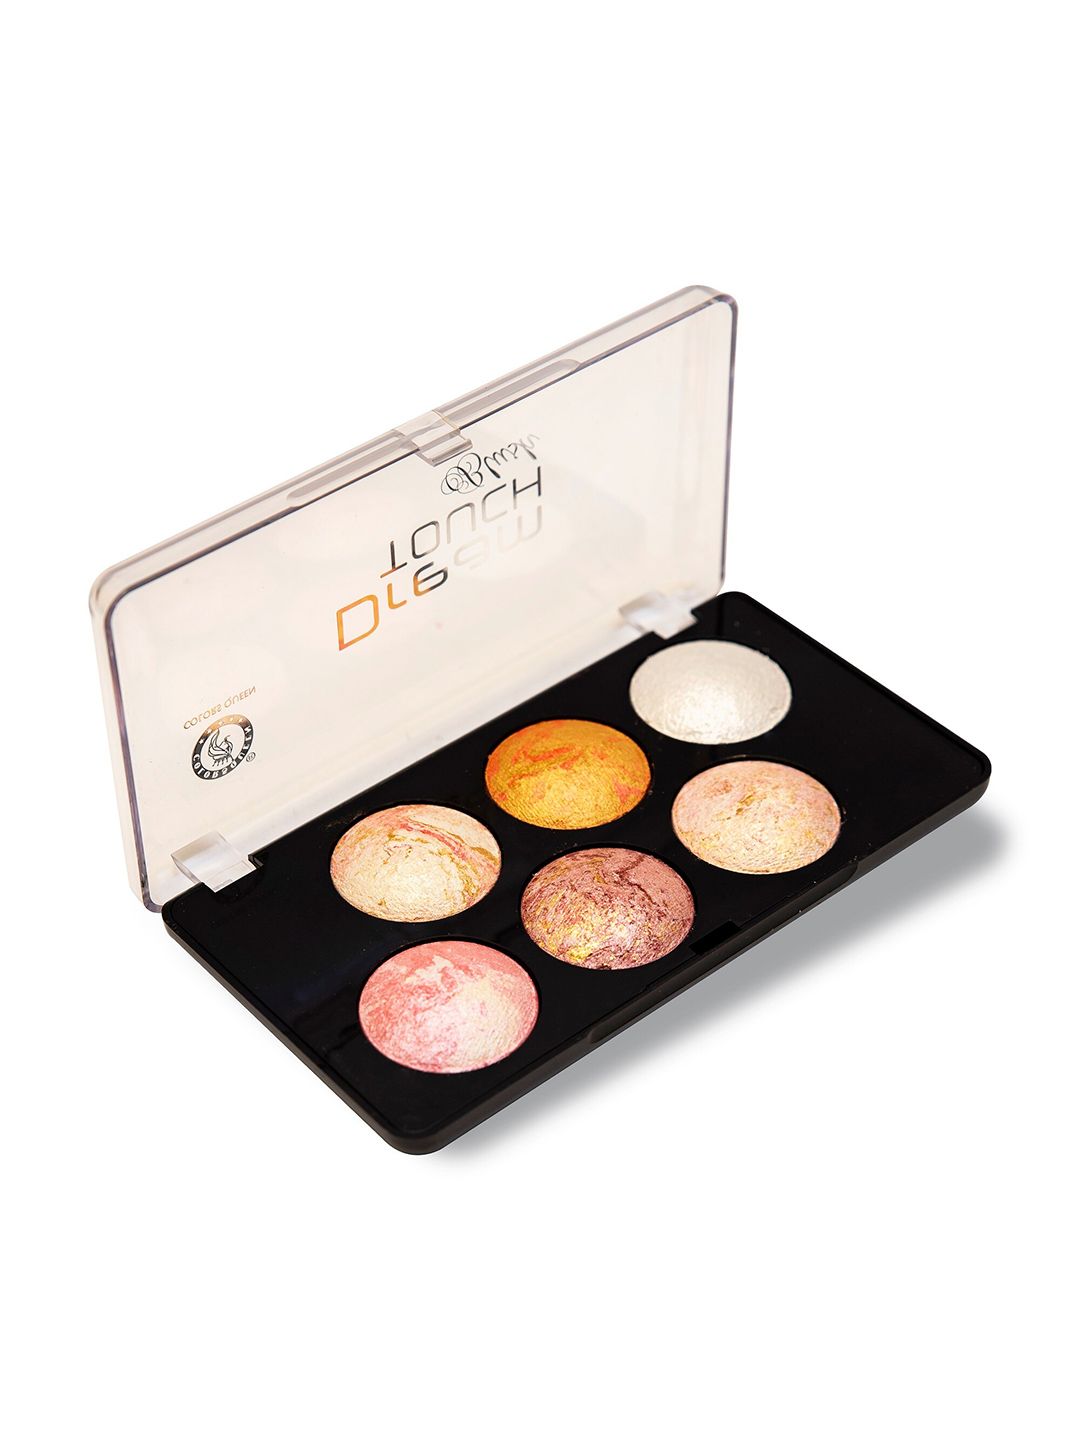 Colors Queen Dream Touch Professional Make-Up Blusher Palette Price in India